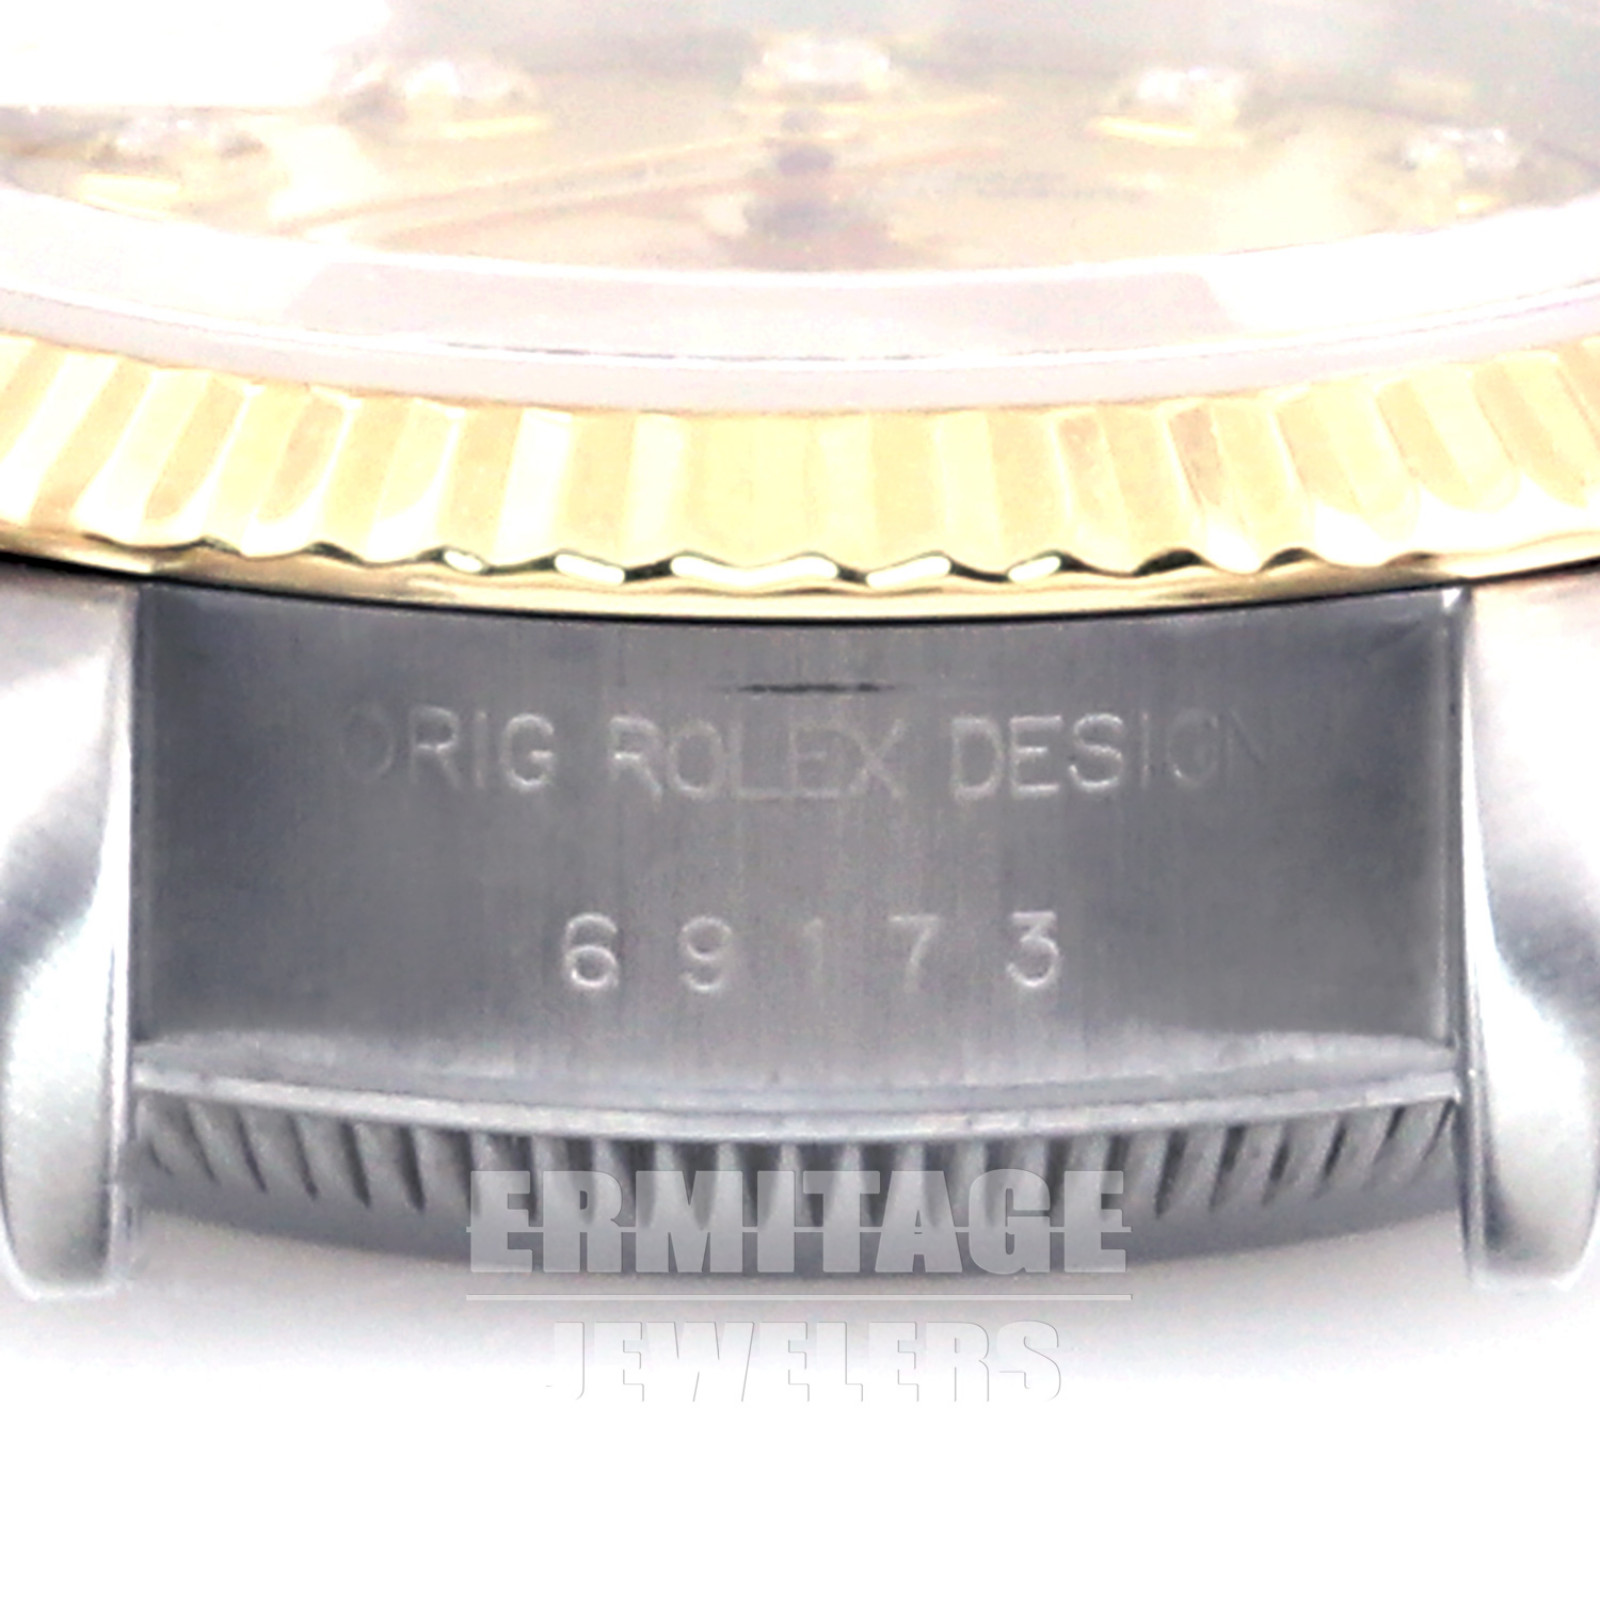 Ladies Rolex Datejust 69173 with Champagne Dial